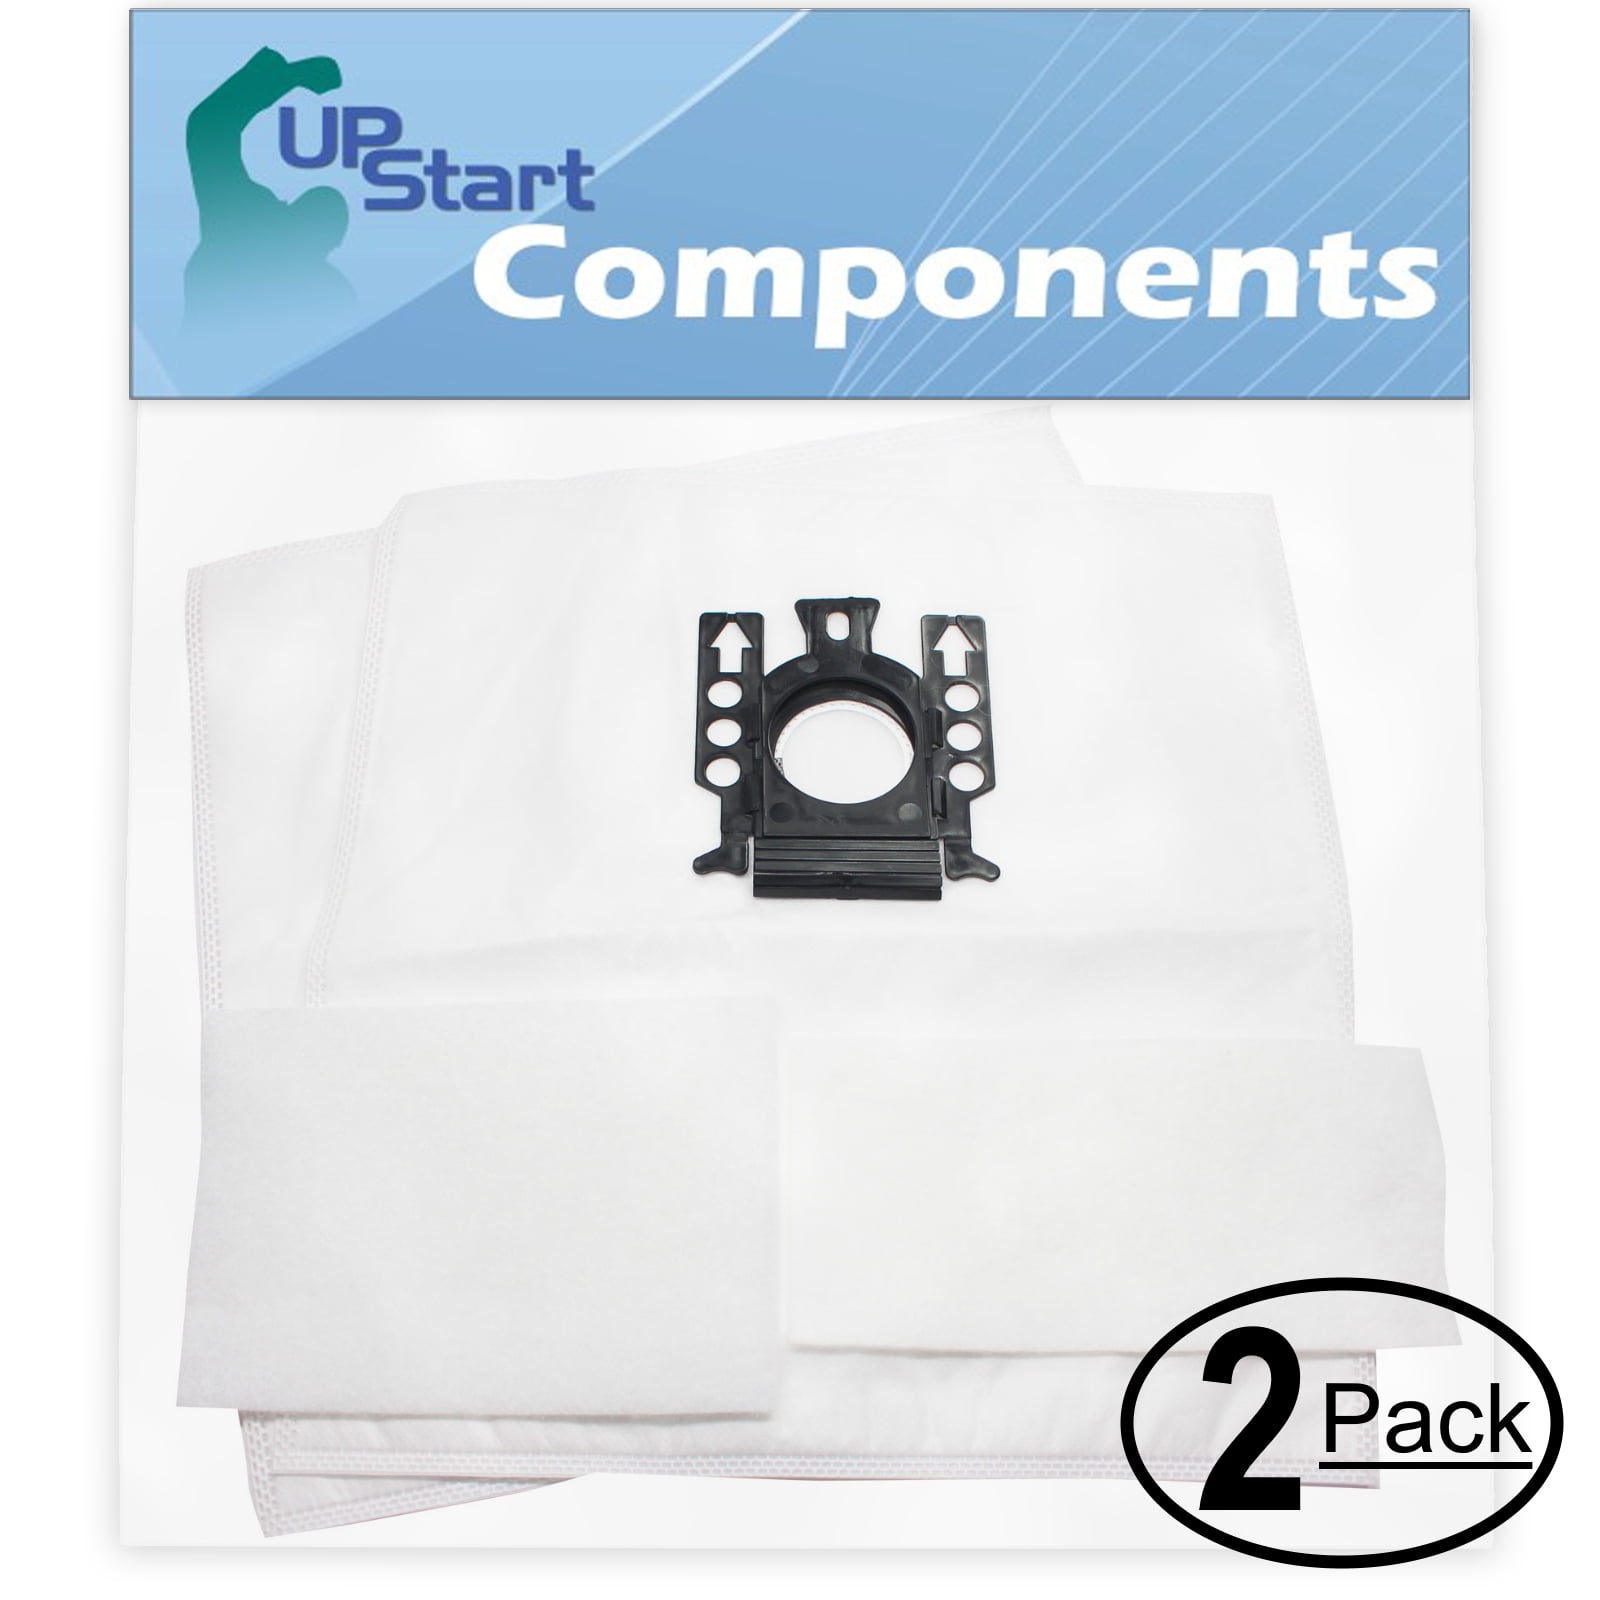 Unifit 175 Dust Bags for various Miele Vacuum Cleaners 5pkt